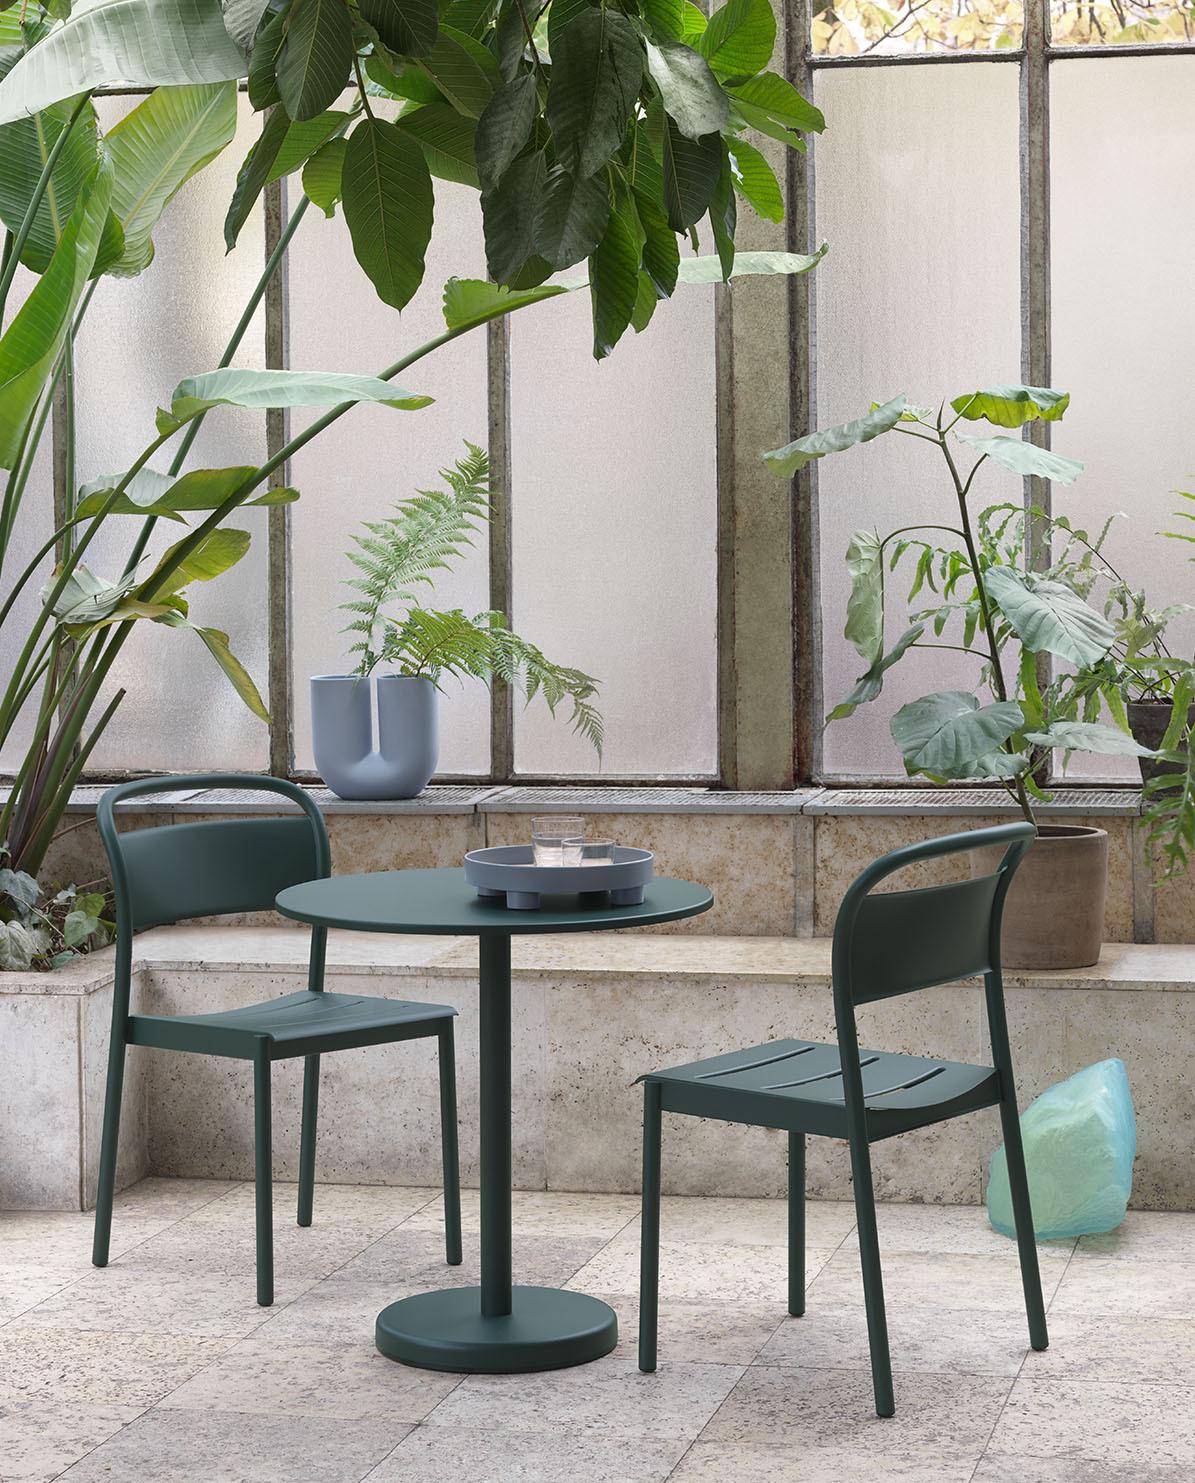 Outdoor Tisch Linear Steel Café Table round One Size